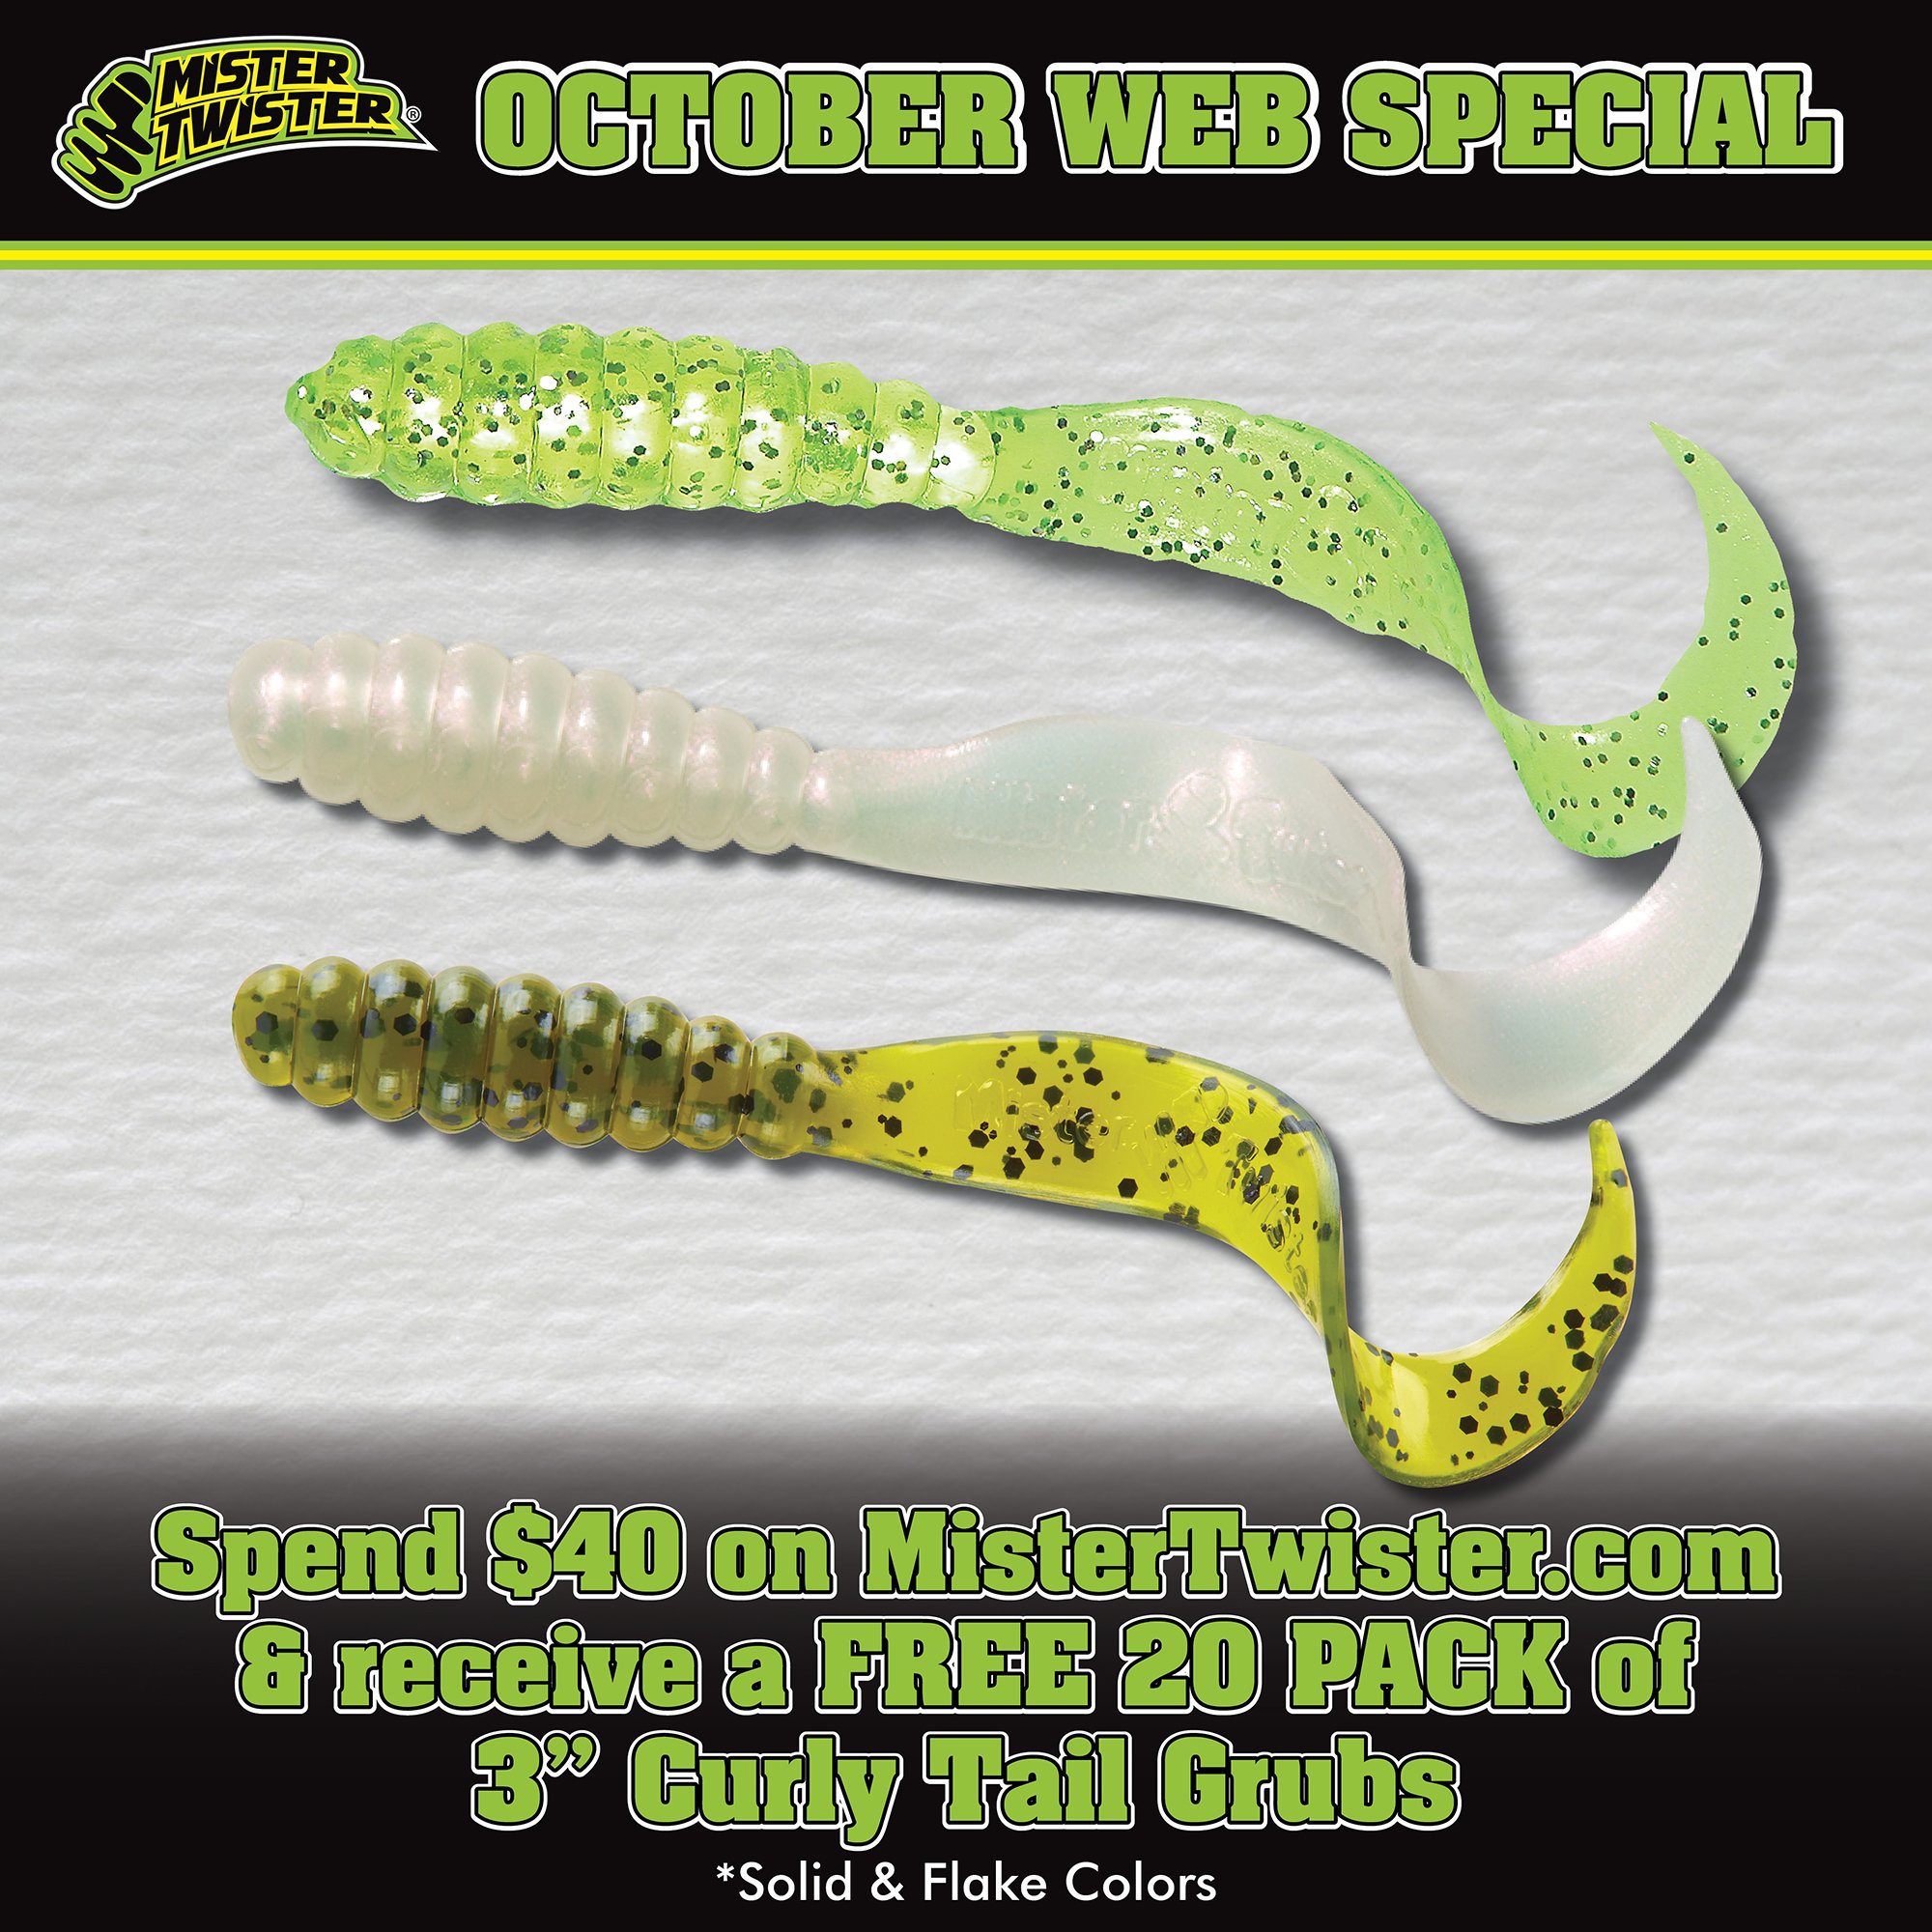 Mister Twister on X: Oct web special is now live! Spend $40 on   & receive a FREE 20Pk of 3 Curly Tails. Not only  did our Curly Tails change the game